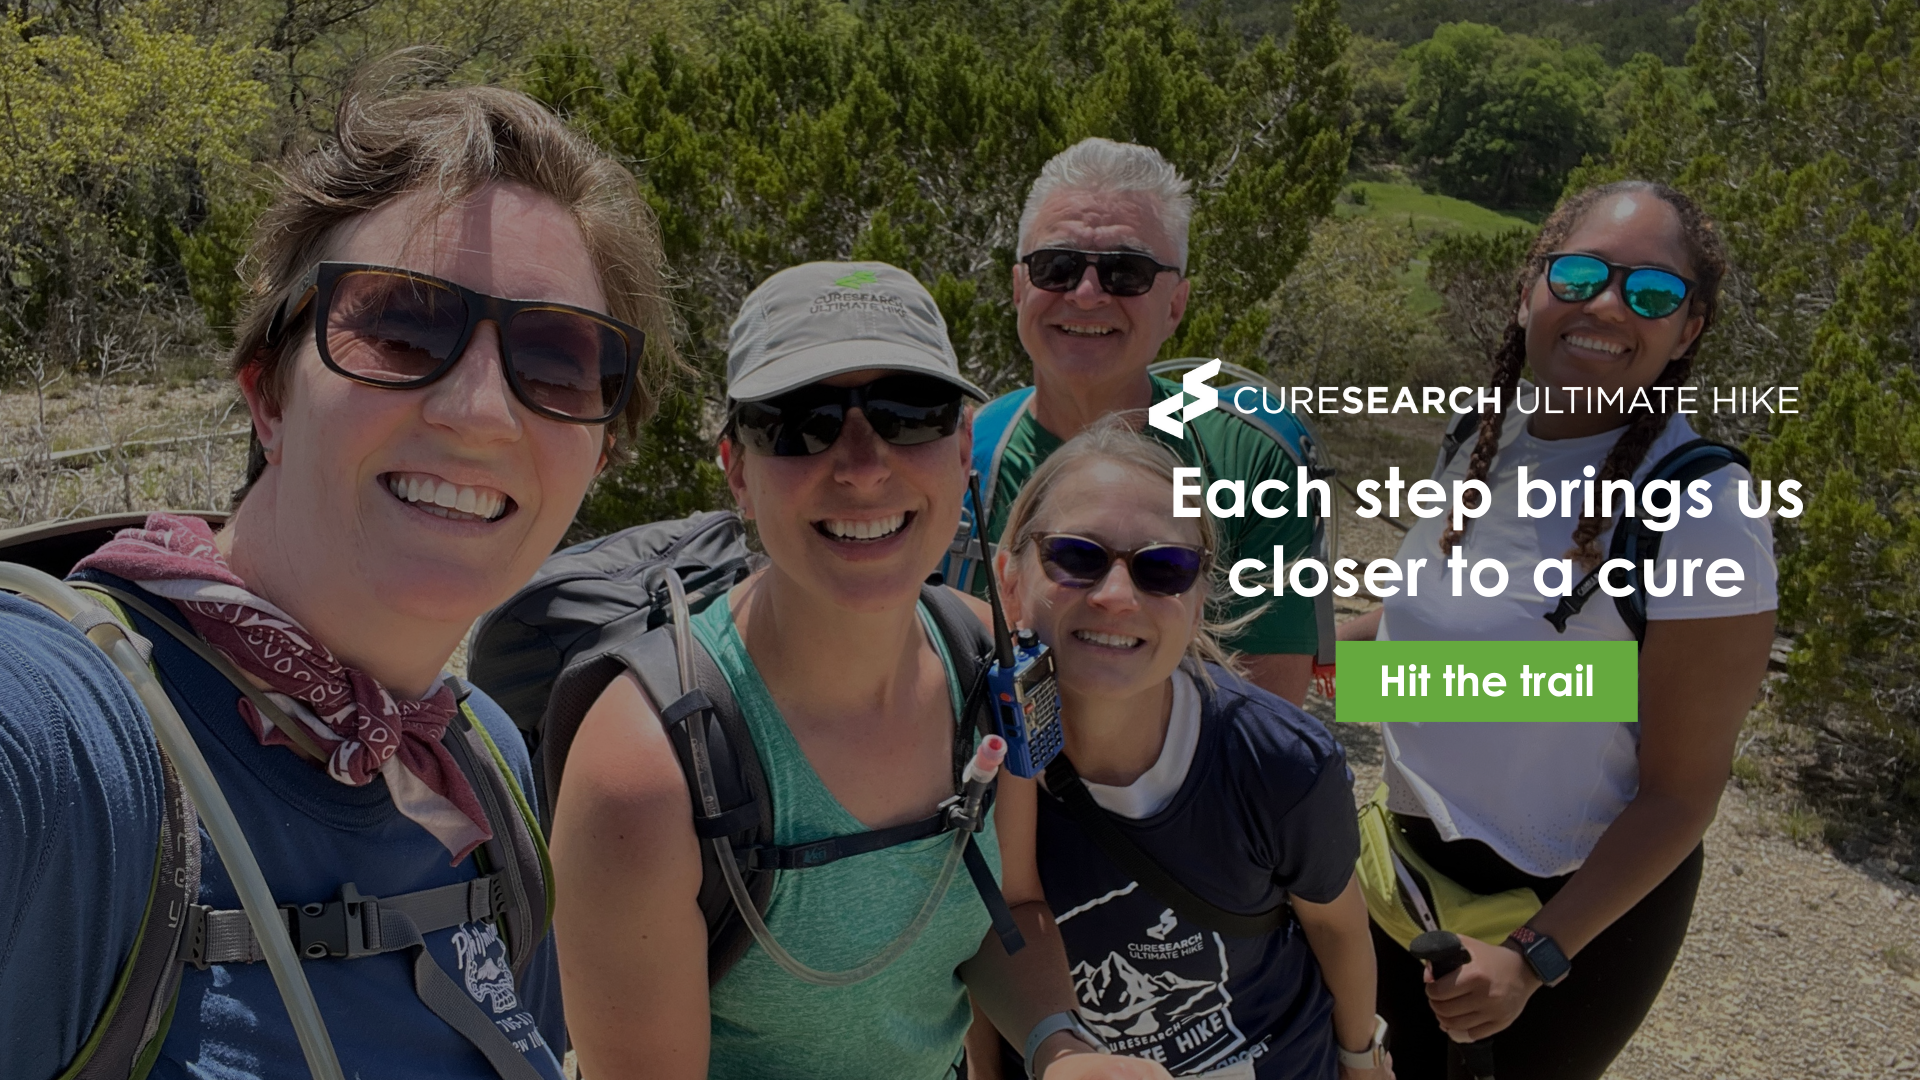 CureSearch Ultimate Hike is the only hiking endurance program focused on childhood cancer. To date, Ultimate Hikers have raised over $10 million in support of CureSearch's mission to end childhood cancer.